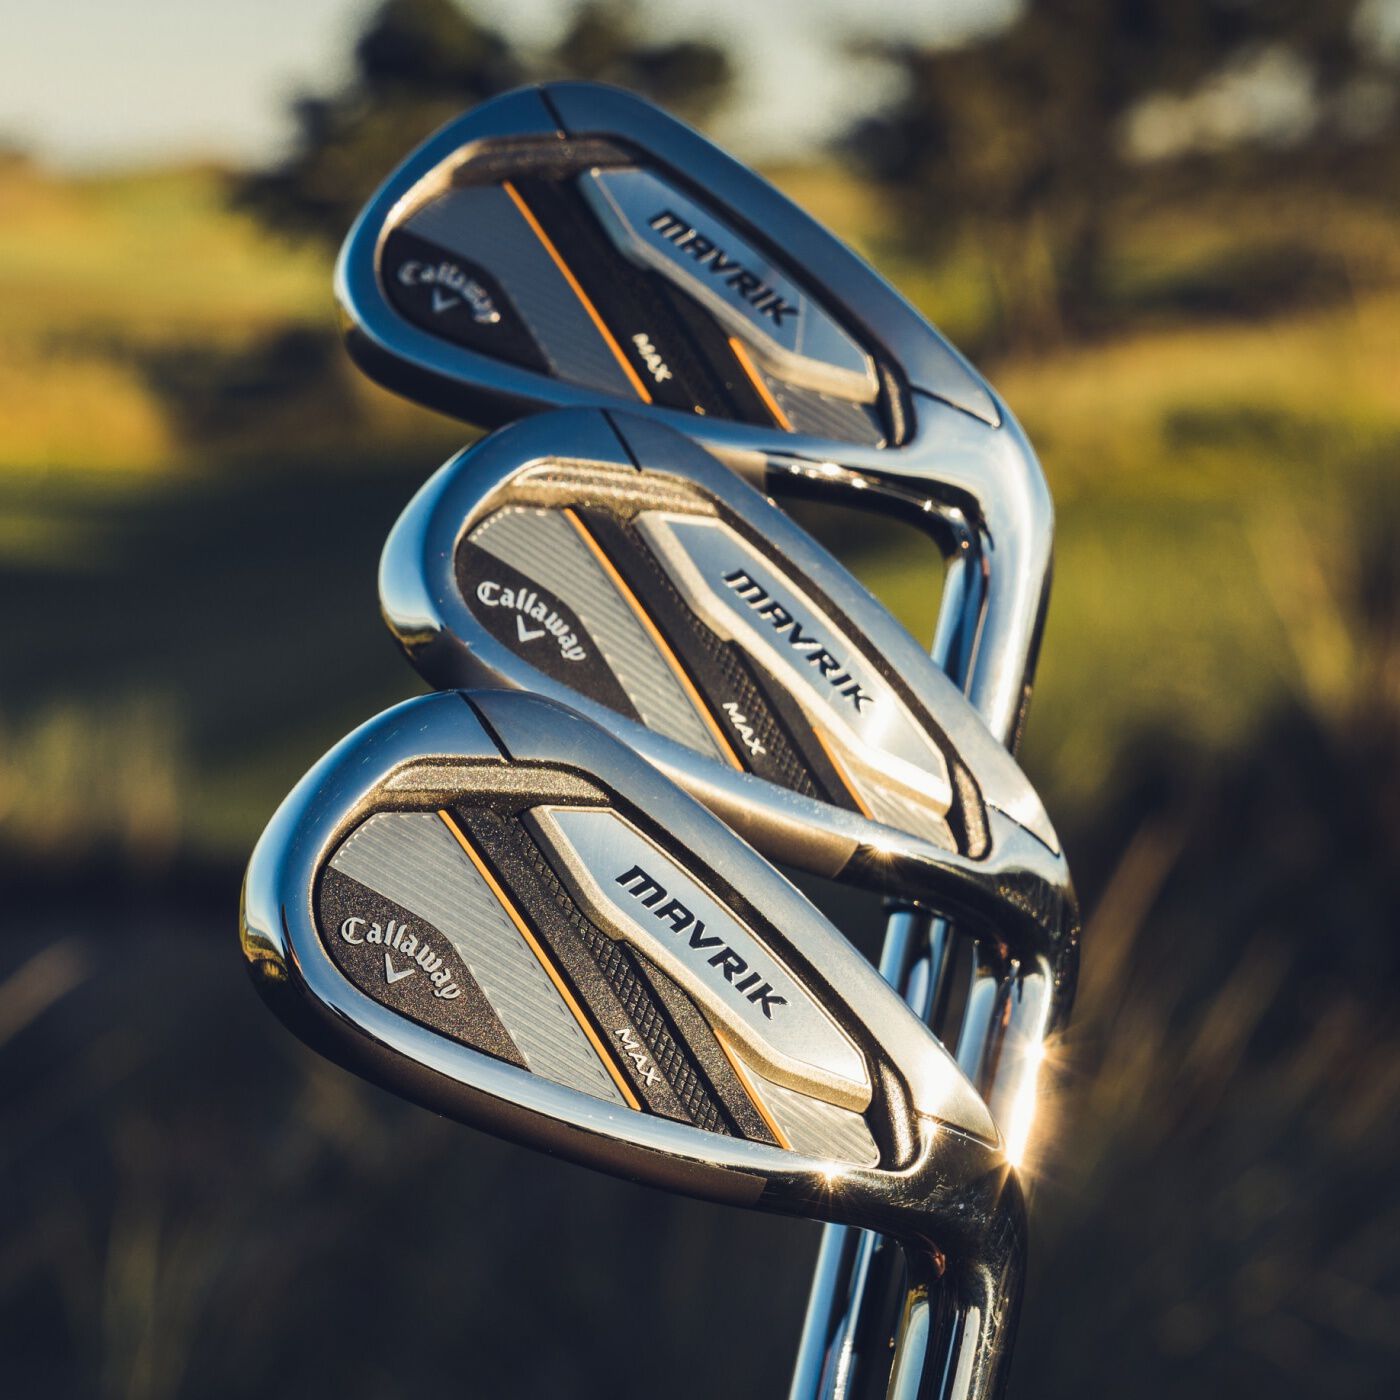 buy used clubs online